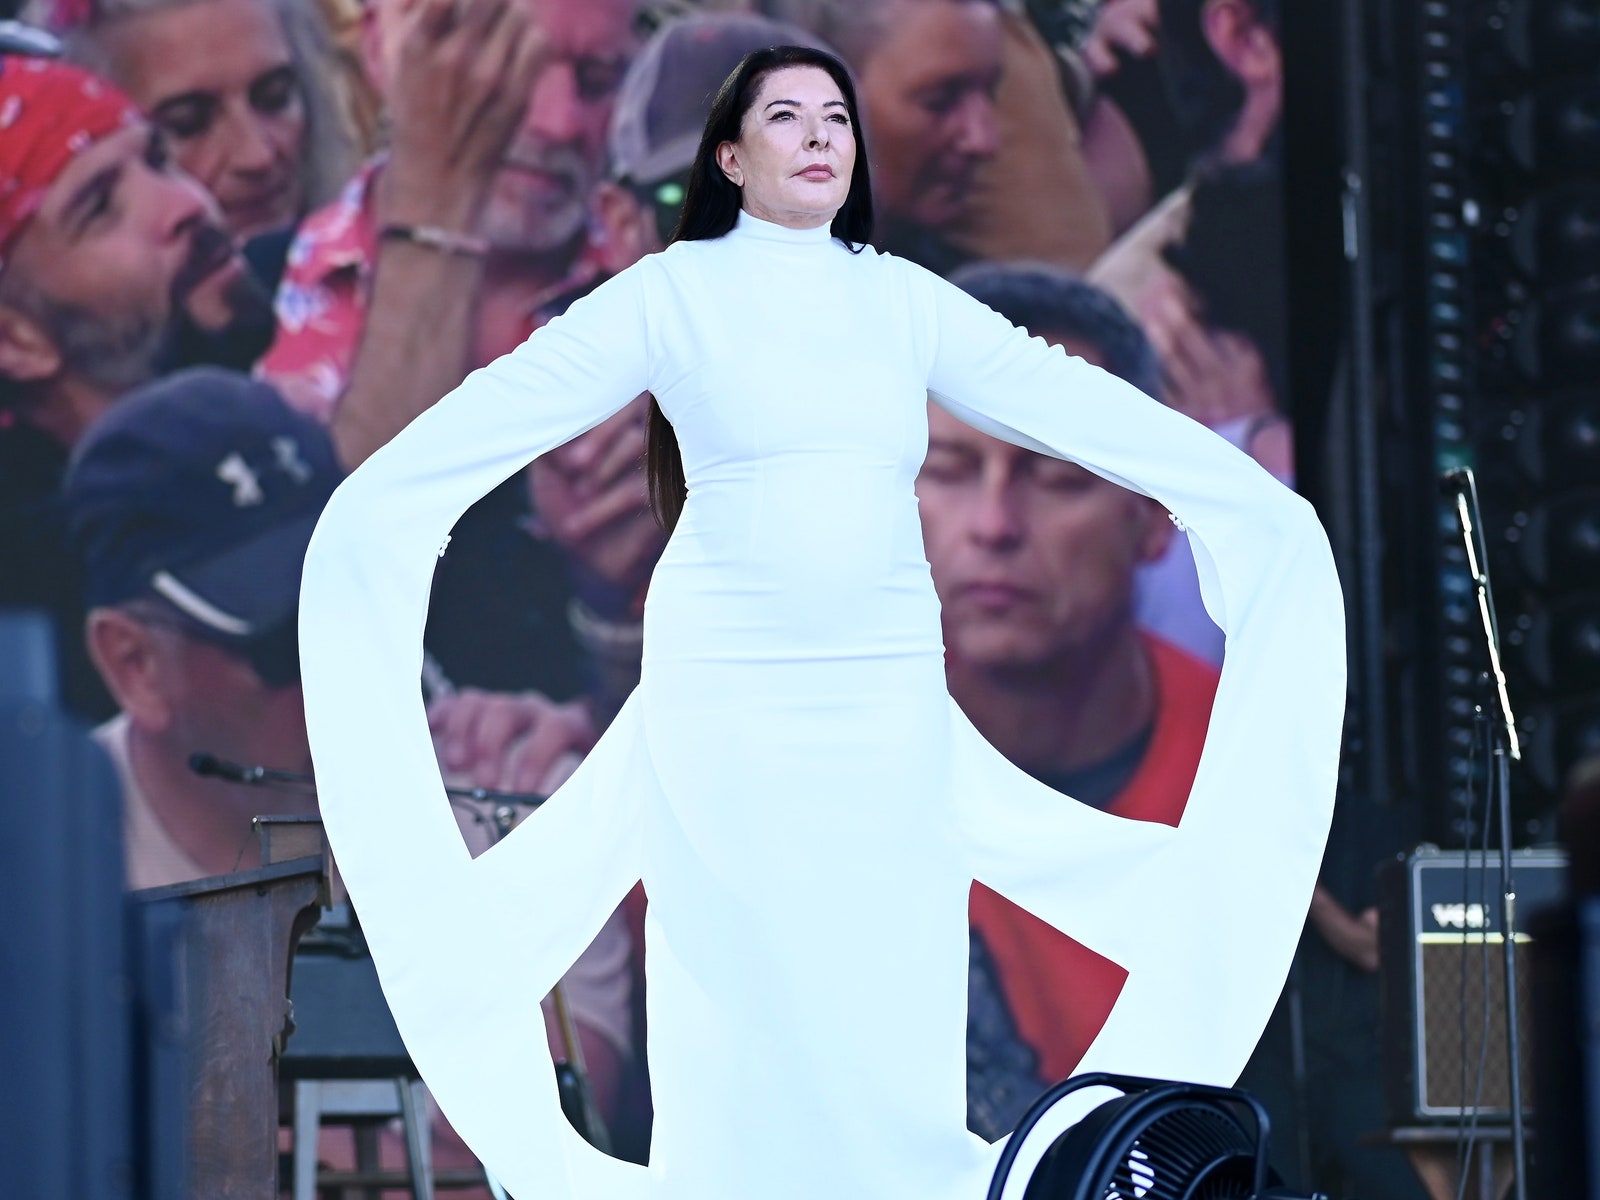 “Fashion&-and the World&-Are in a State of Crisis.” Marina Abramović on 7 Minutes of Silence for Peace at Glastonbury